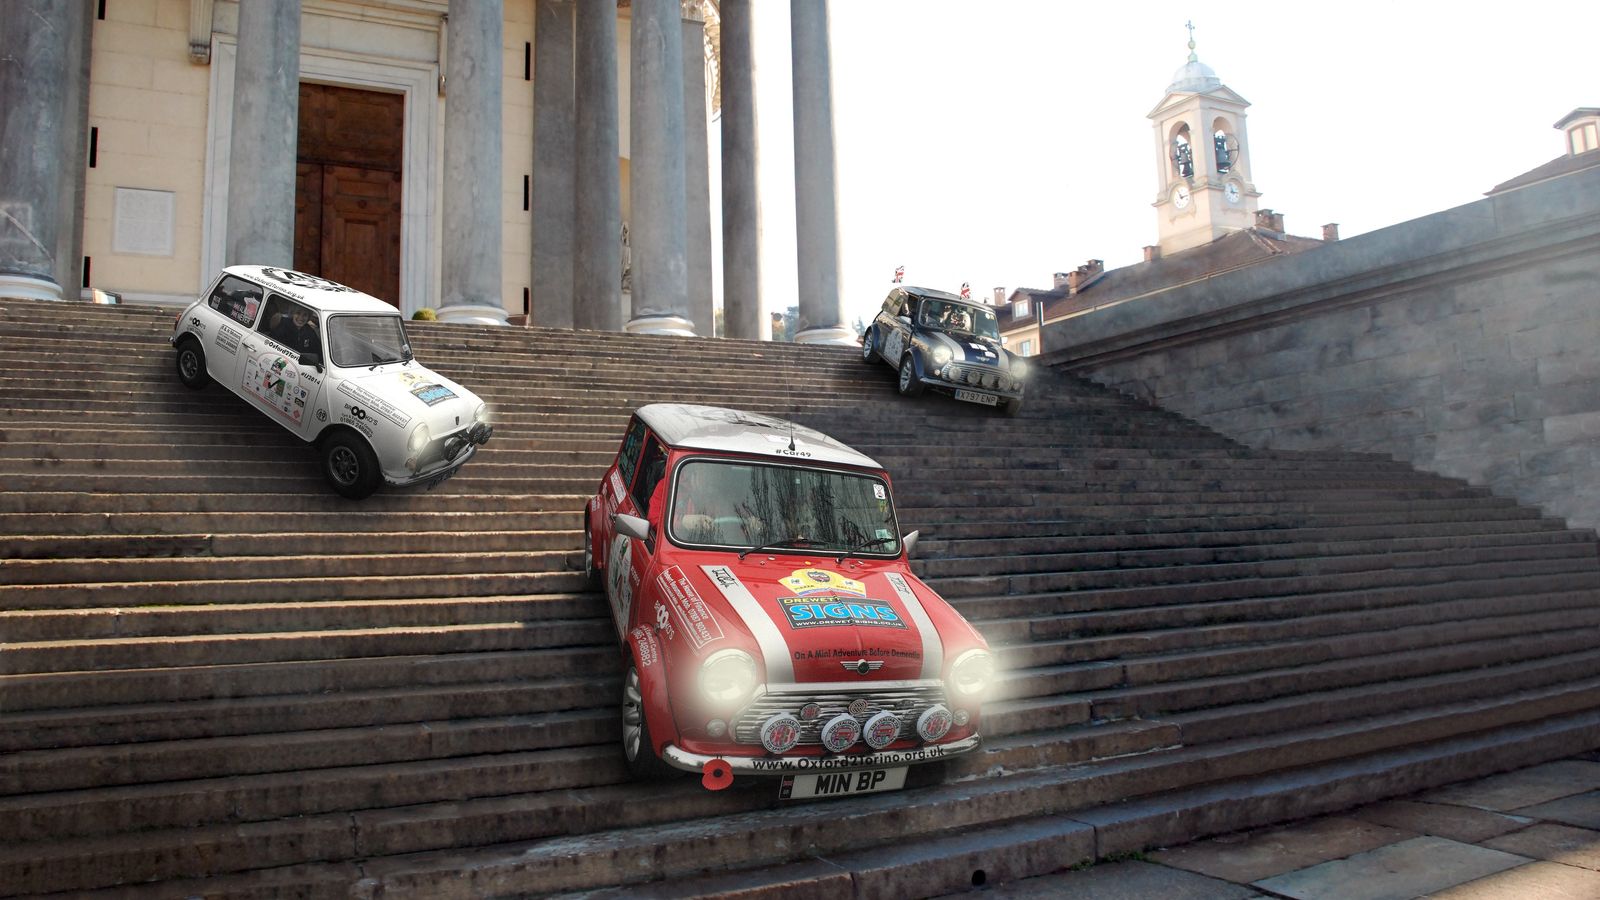 Yorkshire drivers gear up for UK-first Italian Job rally at The Piece Hall